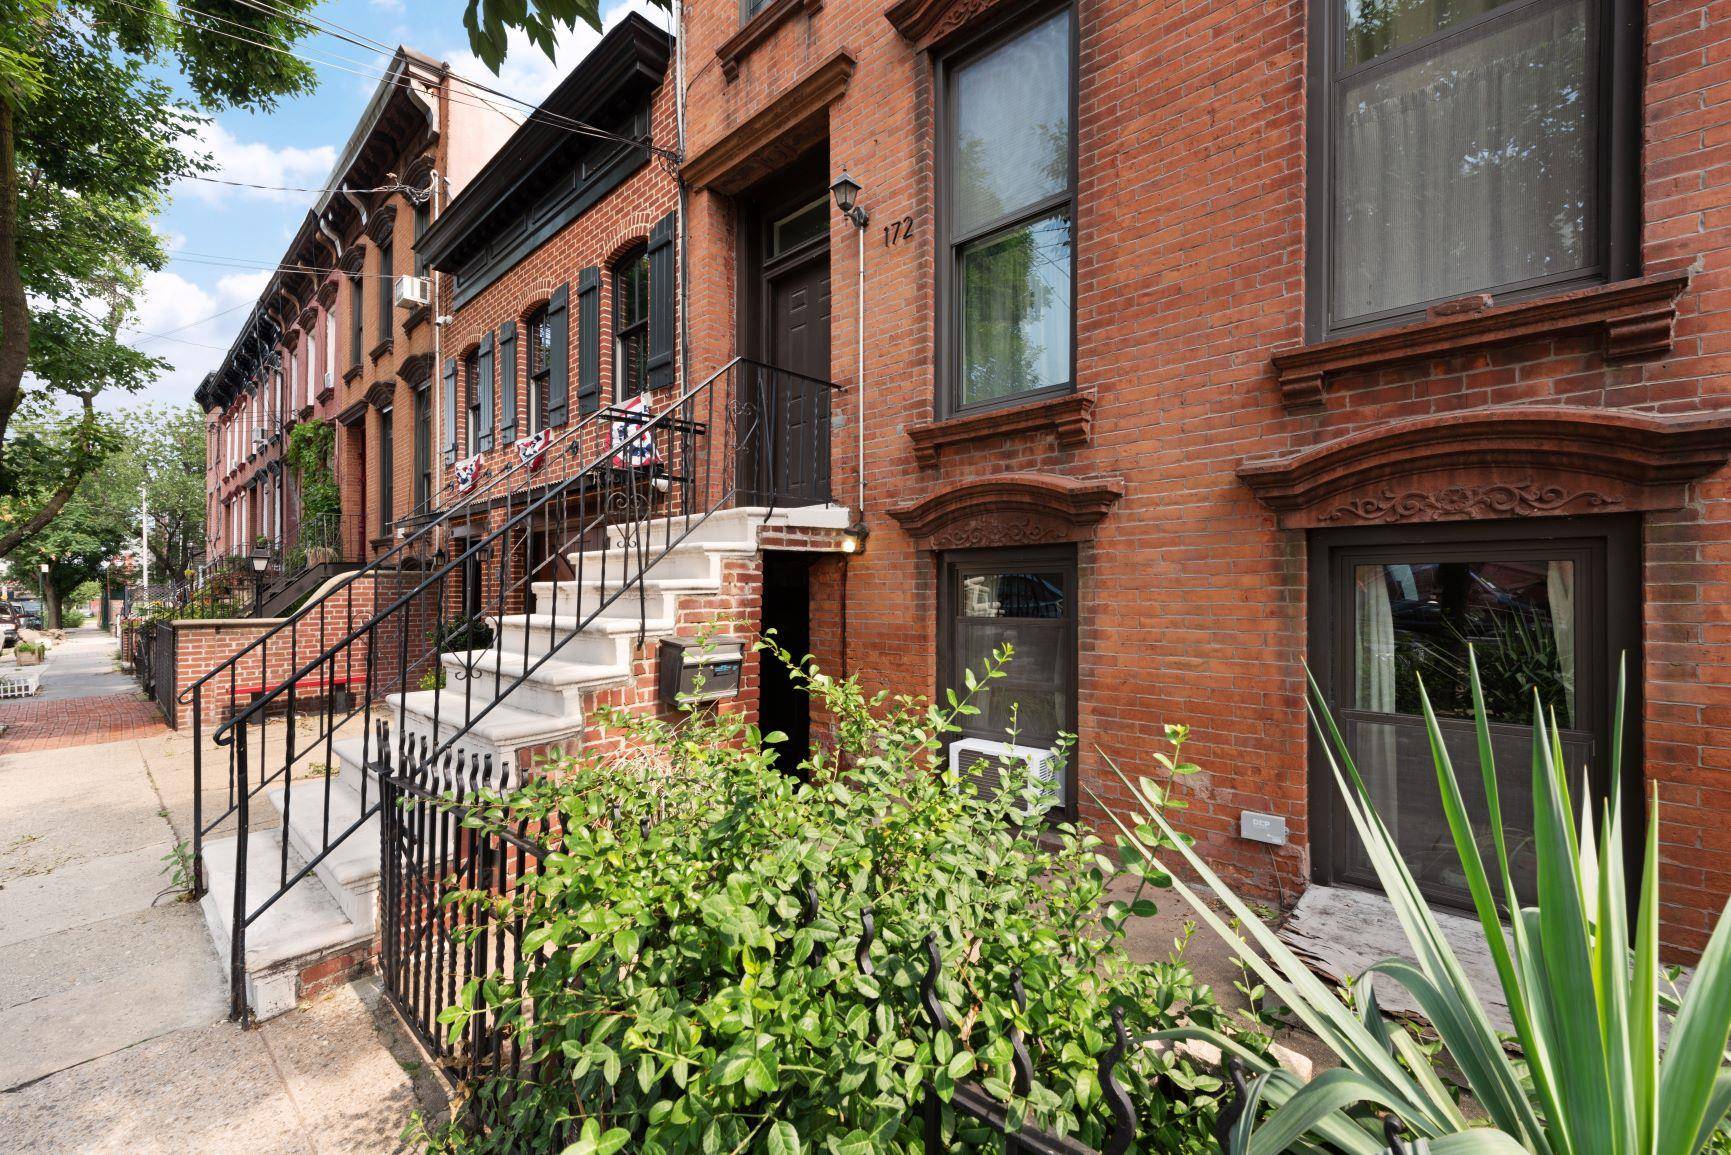 ACCEPTED OFFER. This three family brick Red Hook townhouse has been well maintained over the years.